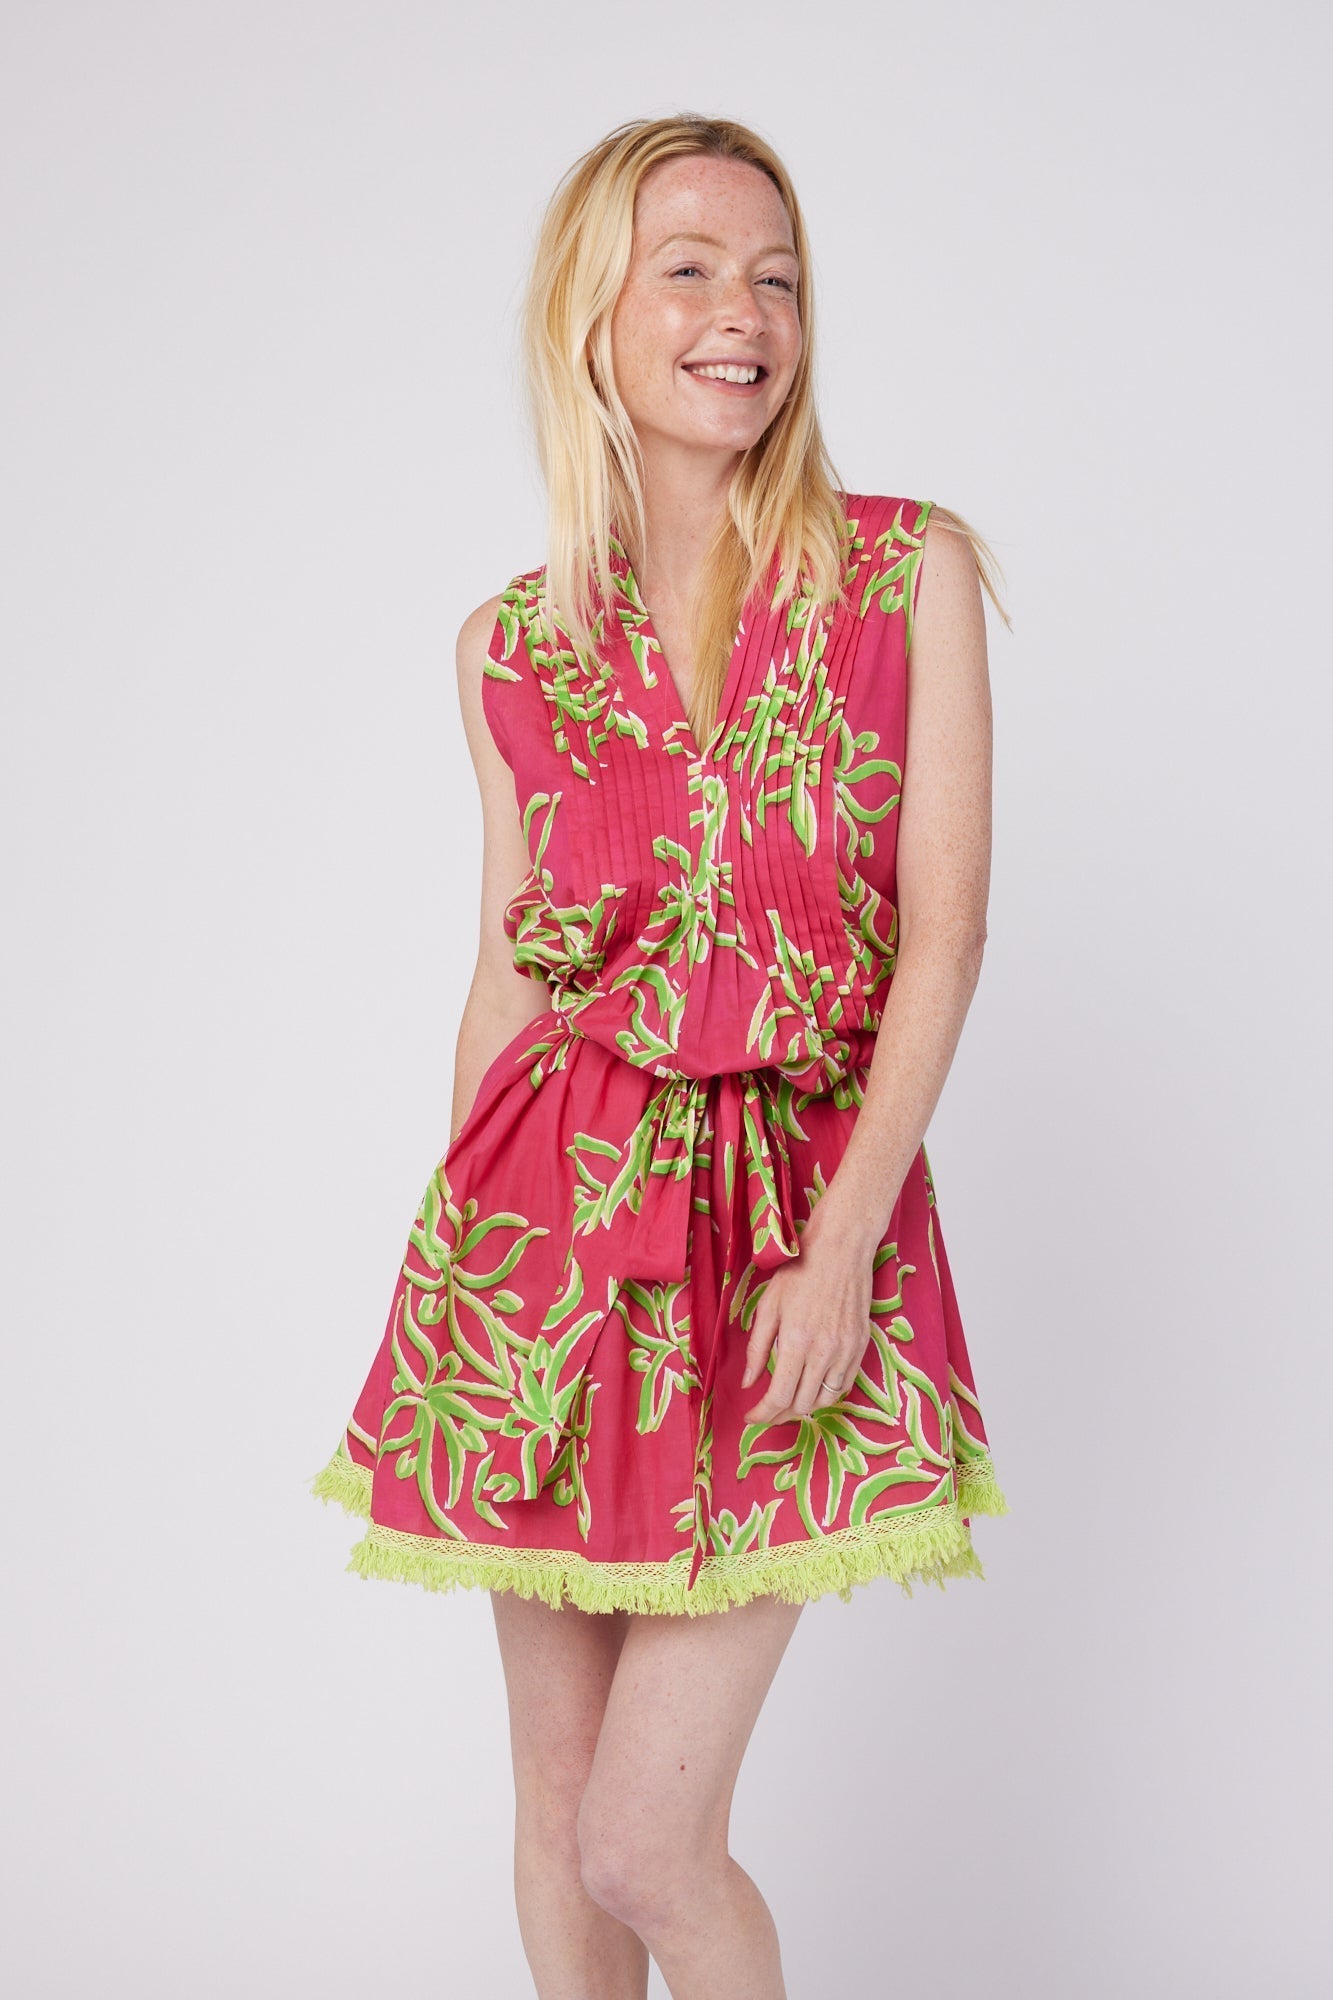 ModaPosa Felice Sleeveless V-Neck Puntuck Knee Length Dress with Detachable Belt in Raspberry Lime Flower . Discover women's resort dresses and lifestyle clothing inspired by the Mediterranean. Free worldwide shipping available!